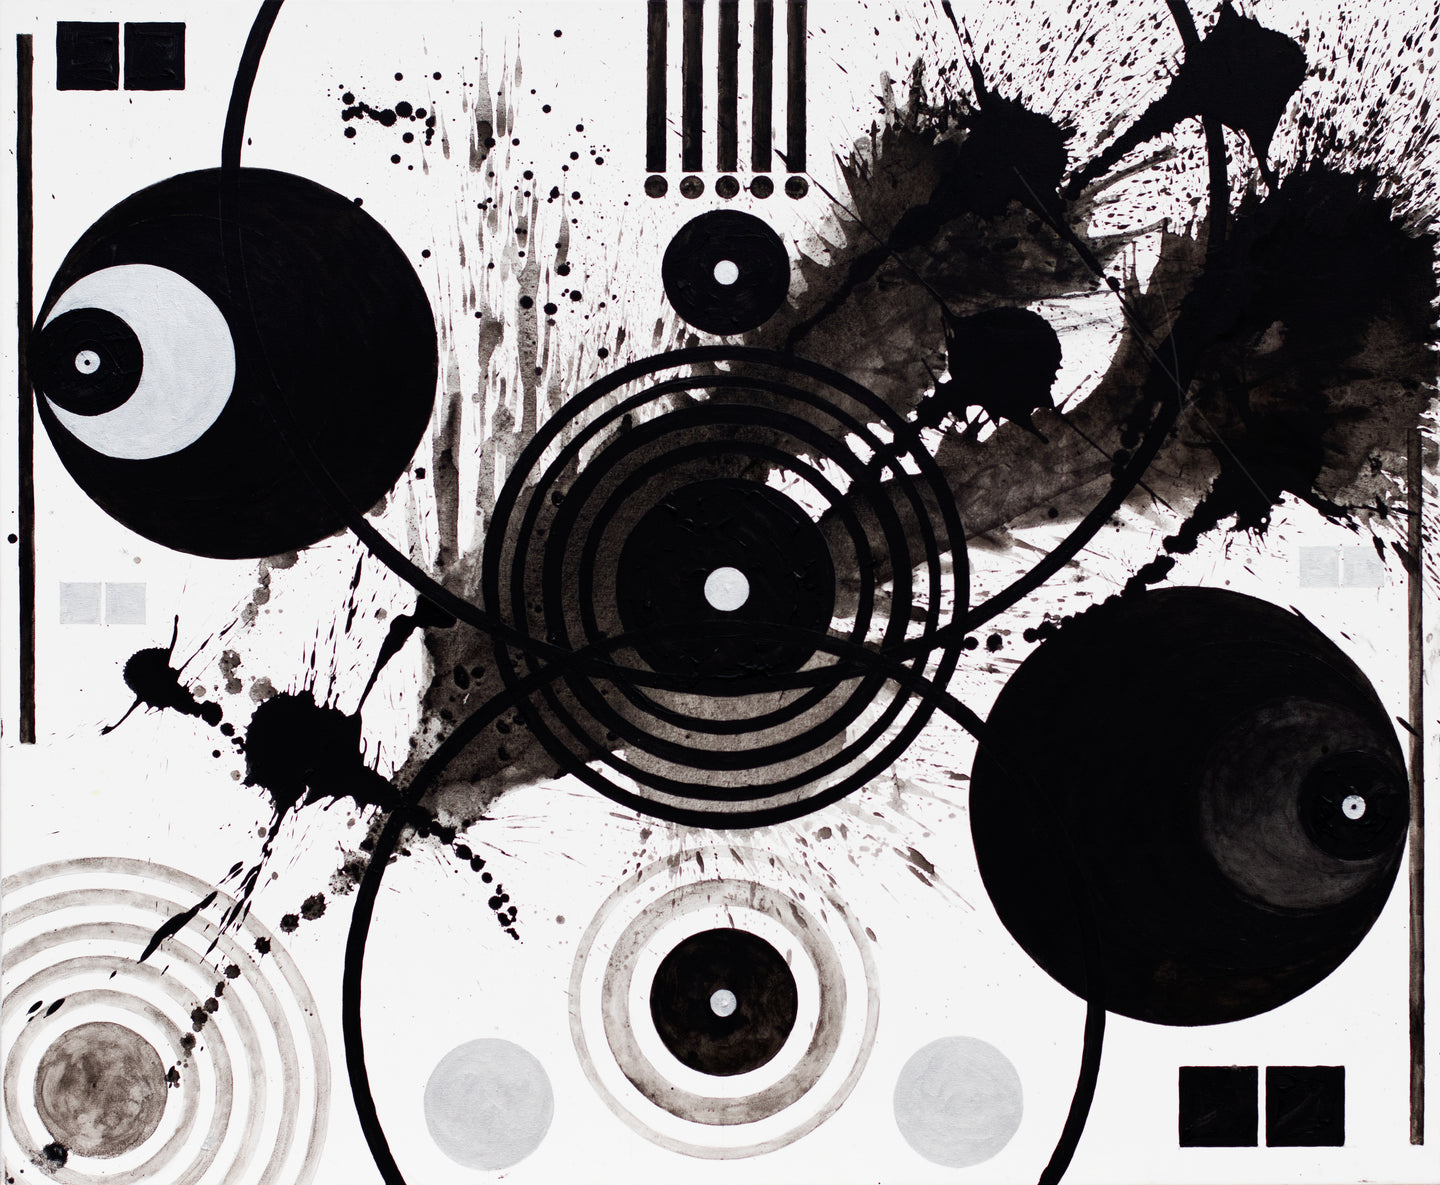 J. Steven Manolis, Black and White (Splashes, Symbols, and Marks),  2018, 60 x 72 inches, Large Black and White Wall Art, Abstract expressionism art for sale at Manolis Projects Art Gallery, Miami, Fl